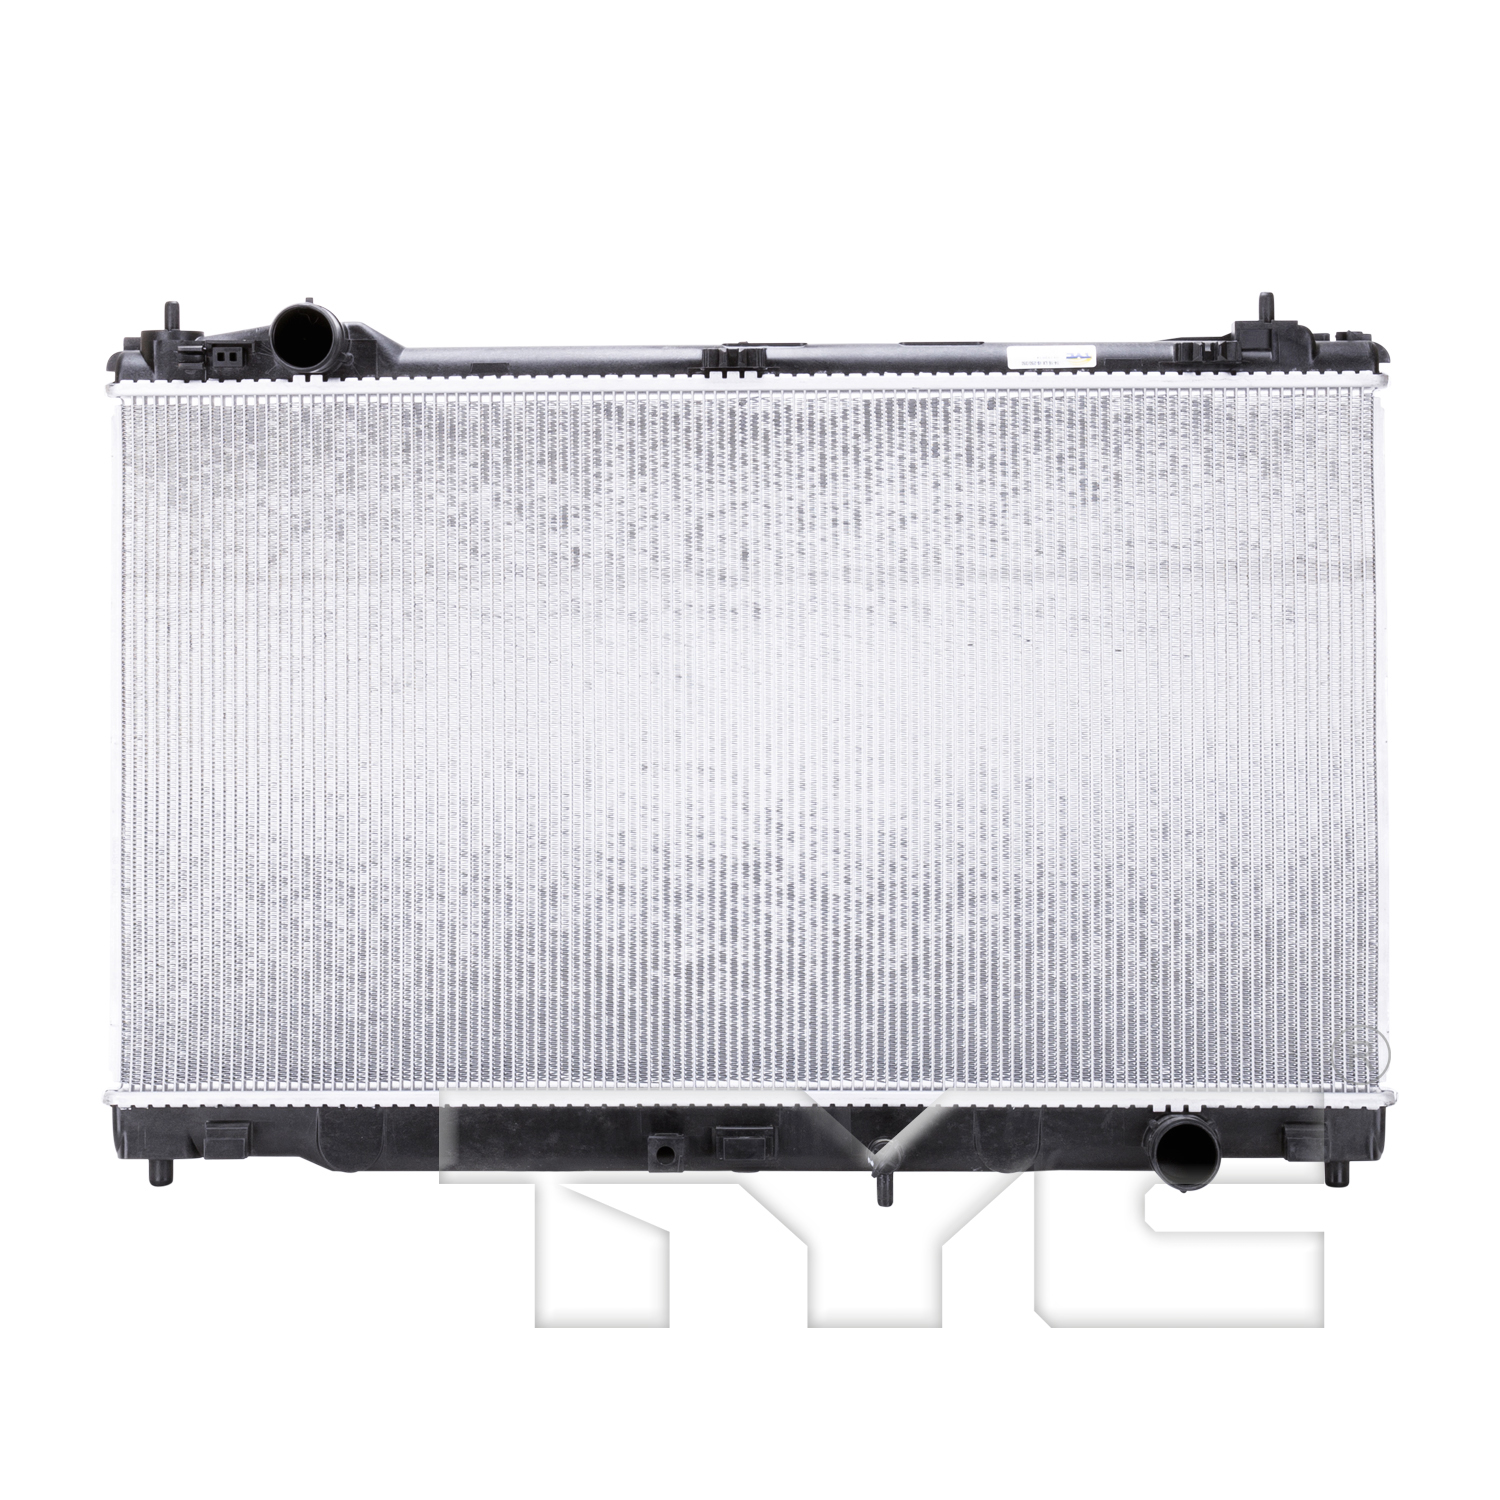 Aftermarket RADIATORS for LEXUS - IS300, IS300,16-17,Radiator assembly